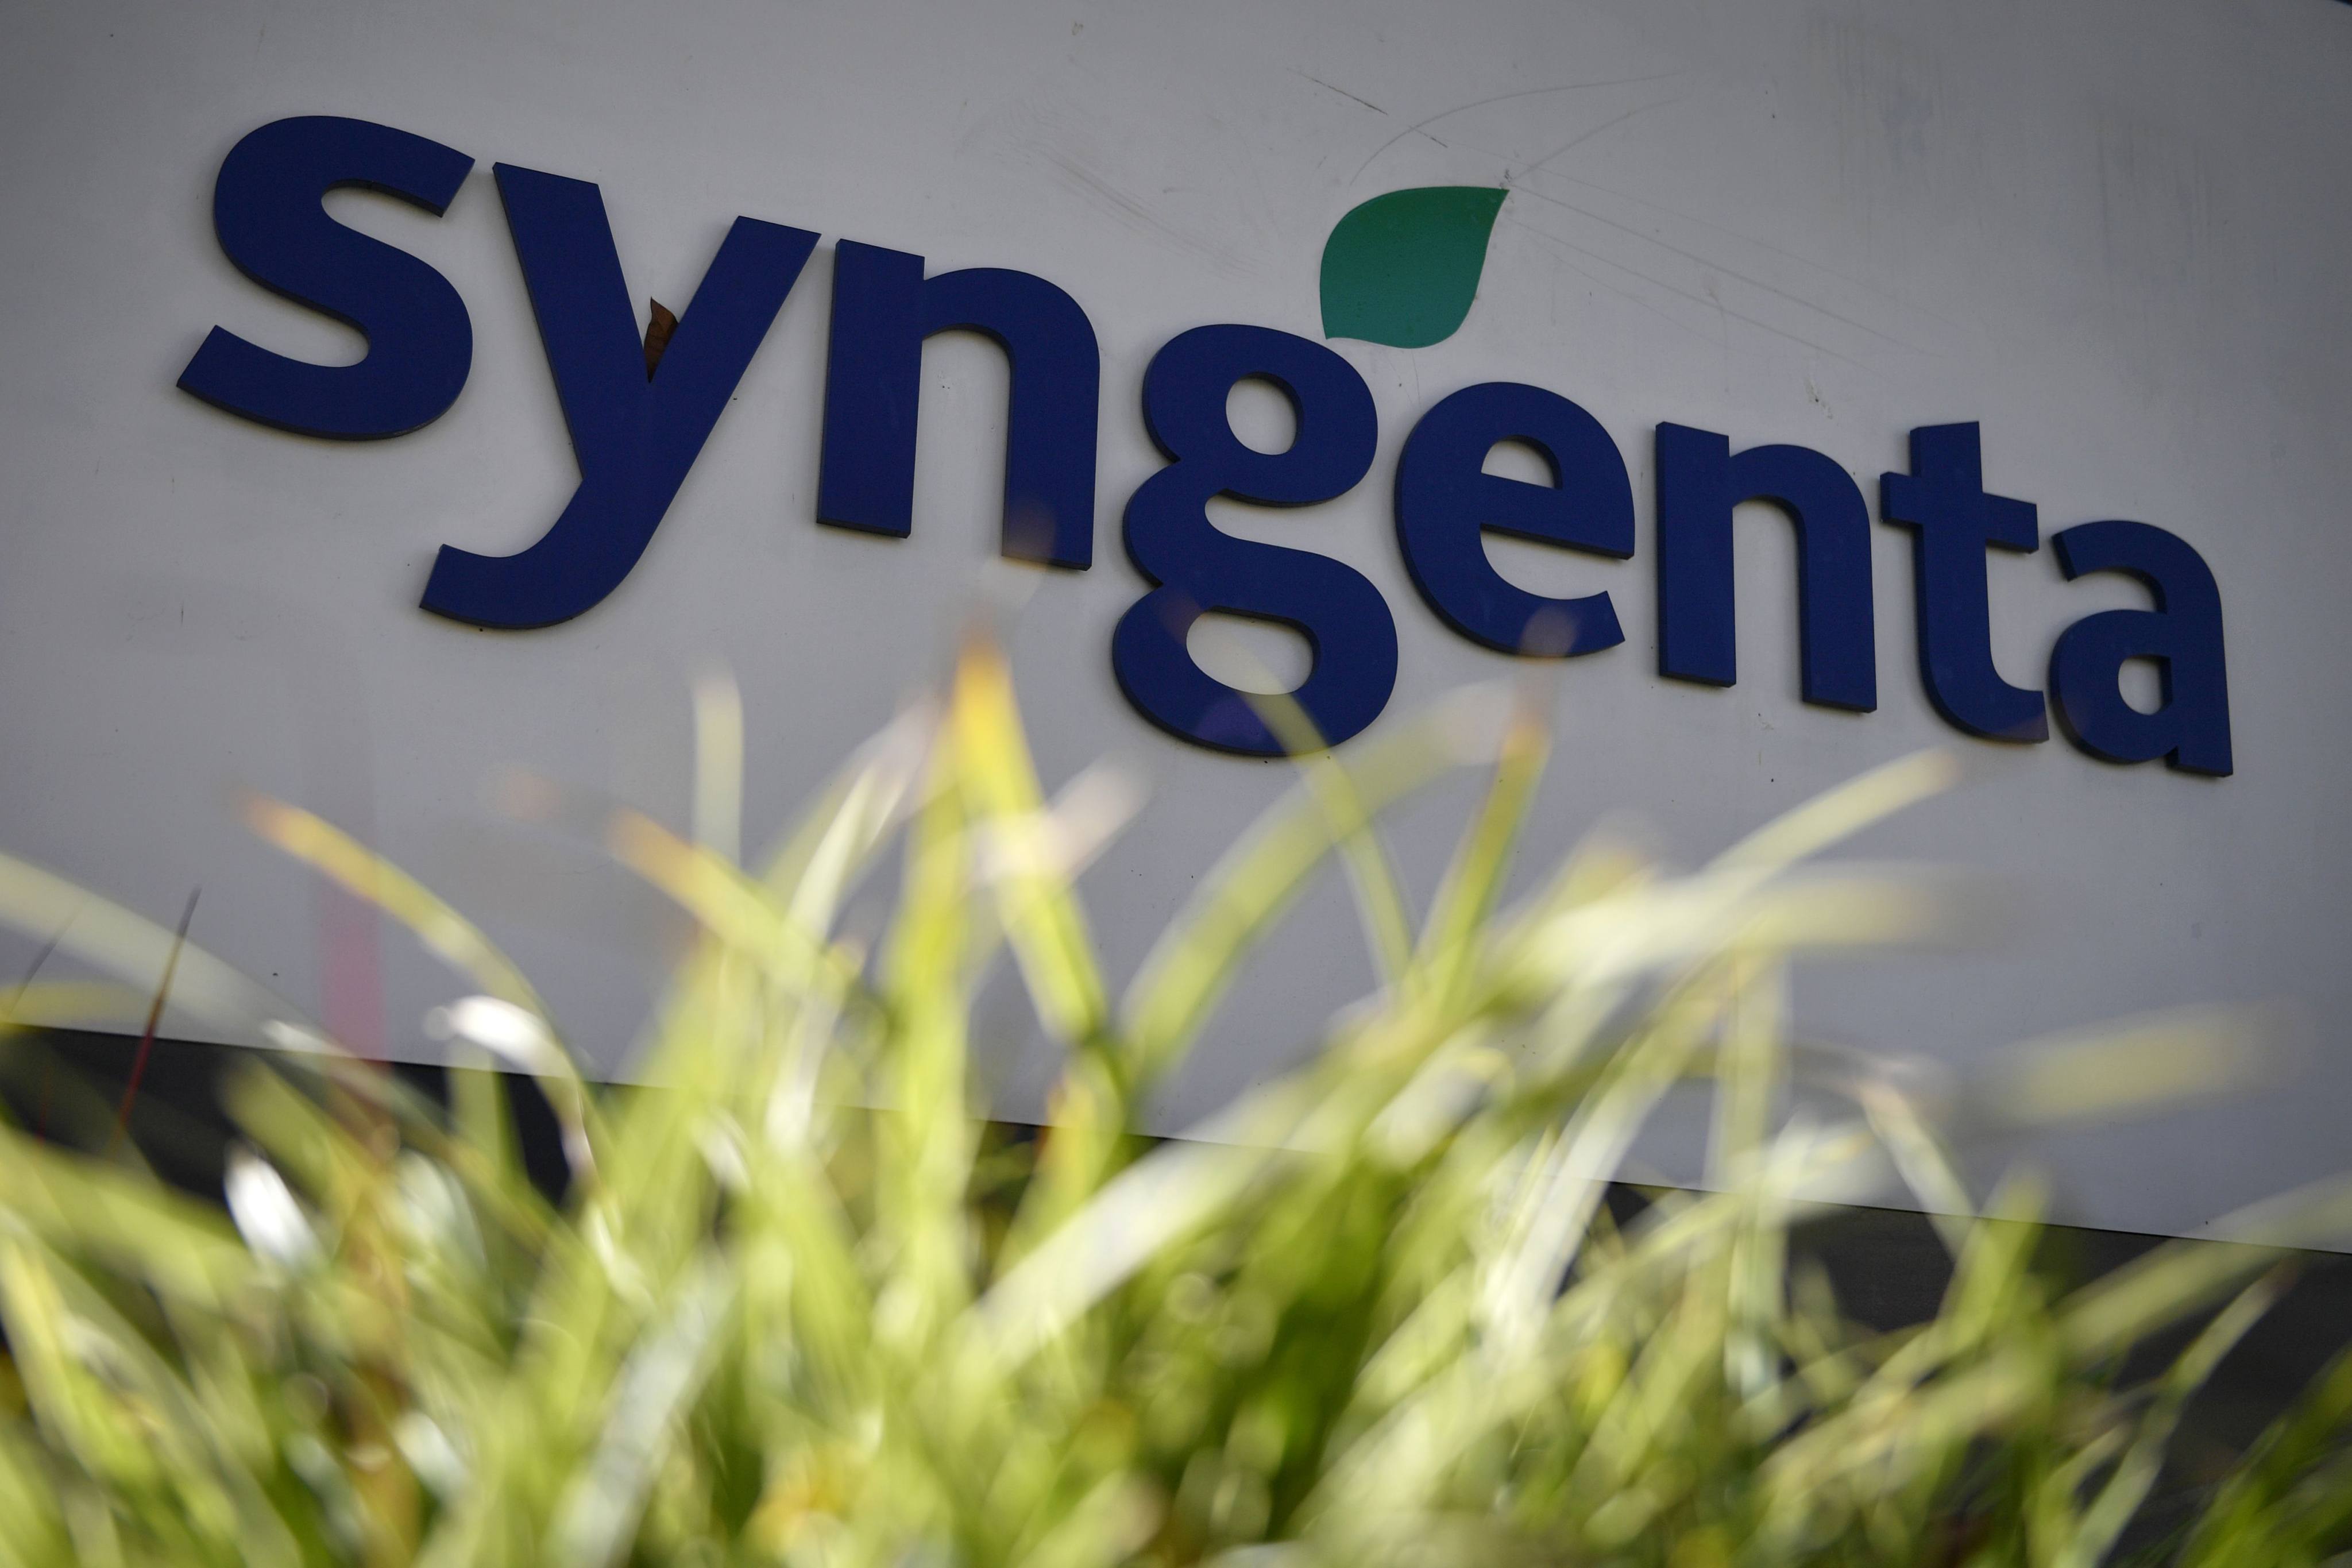 Syngenta headquarters in Basel. Syngenta was bought out by ChemChina for US$43 billion in 2017, in the biggest overseas takeover by a Chinese company. Photo: AFP